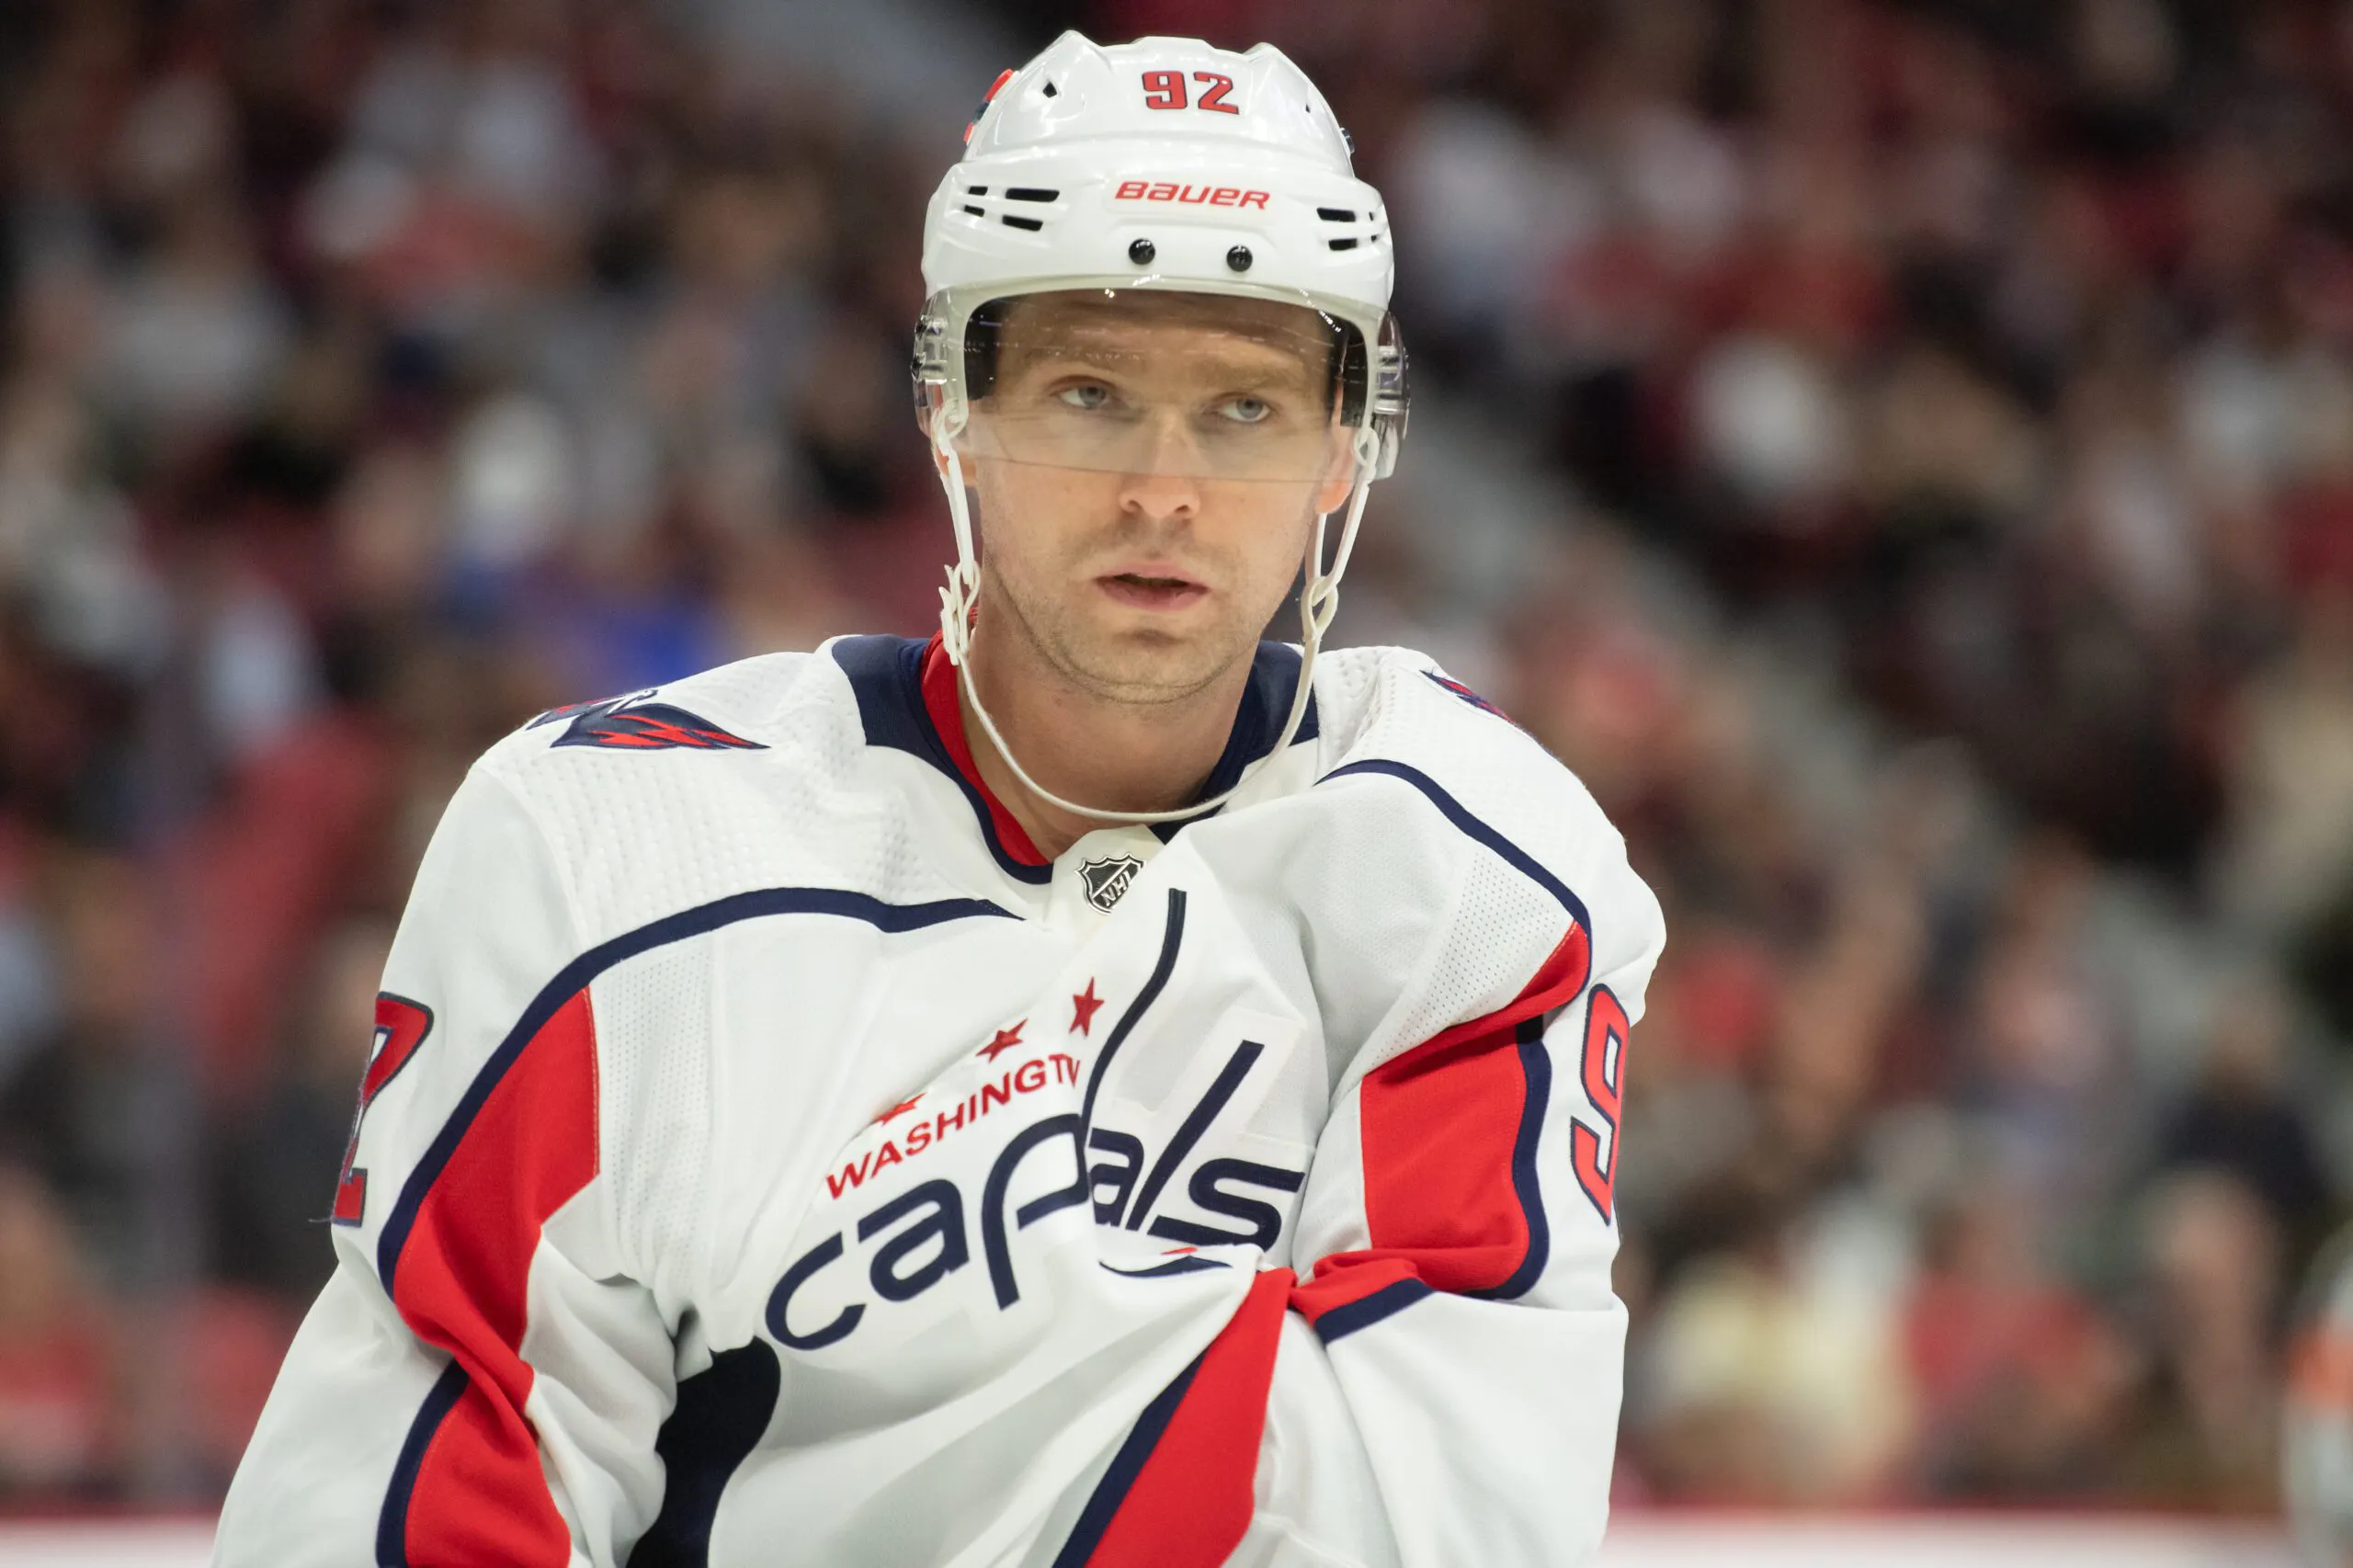 Evgeny Kuznetsov clears waivers, becomes highest-salaried player in AHL history